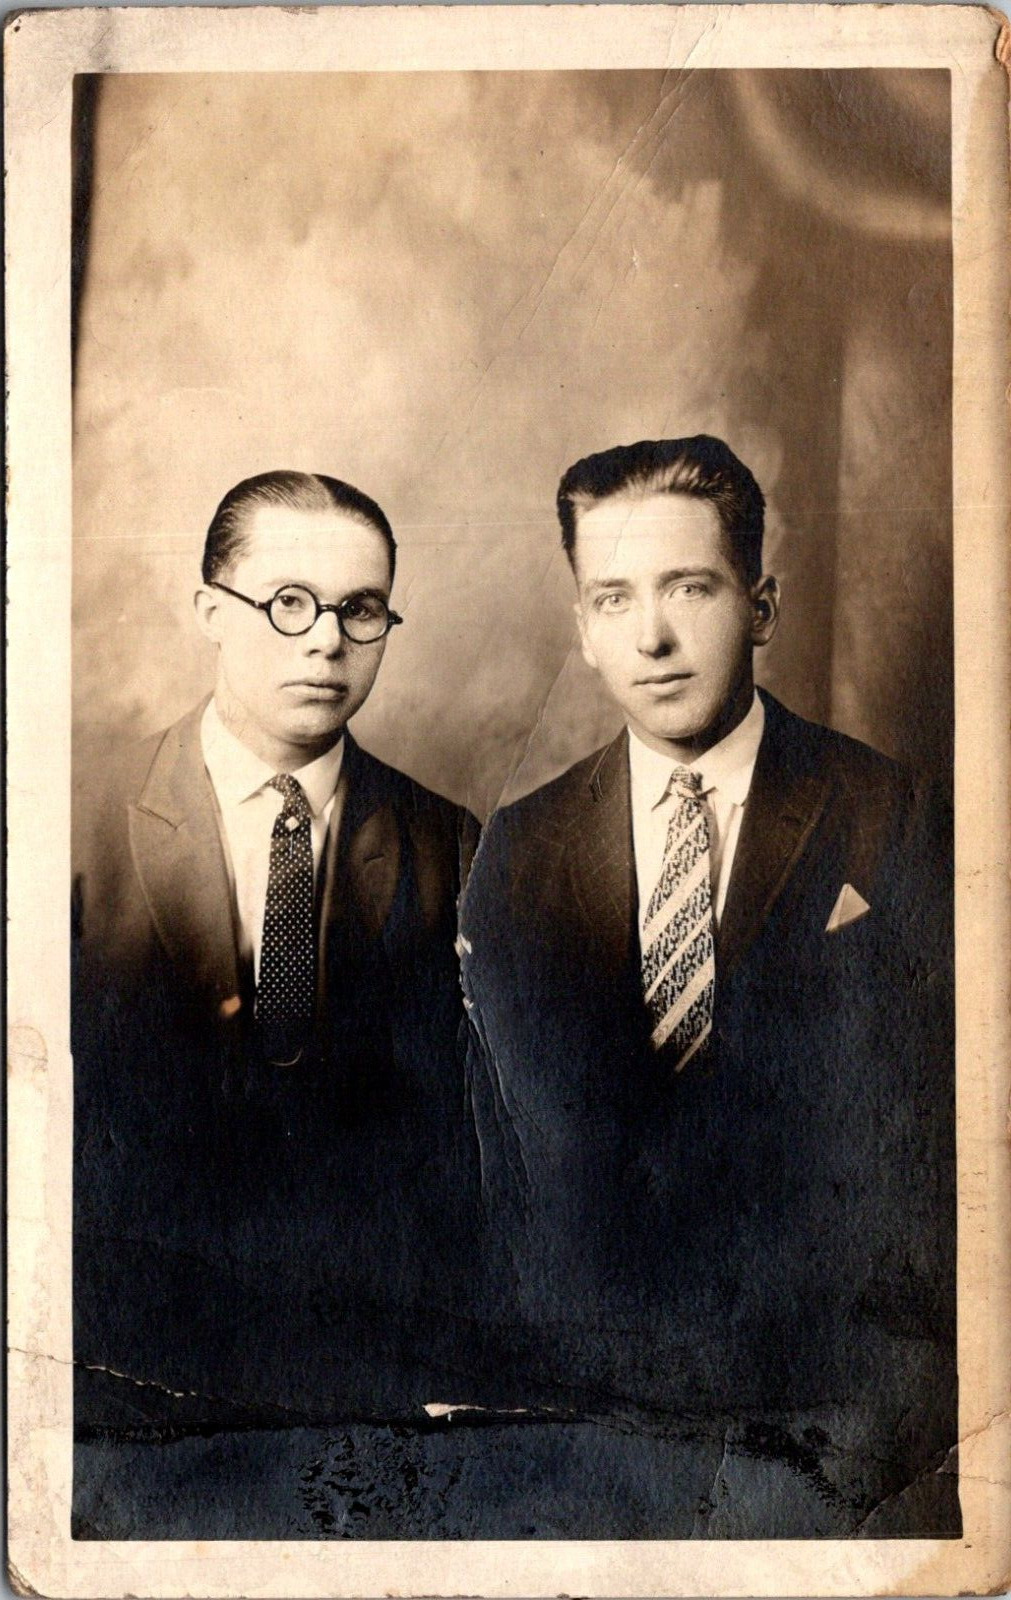 Antique BW RPPC Men Photo Akron OH Well Dressed Groomed Gay Interest Postcard